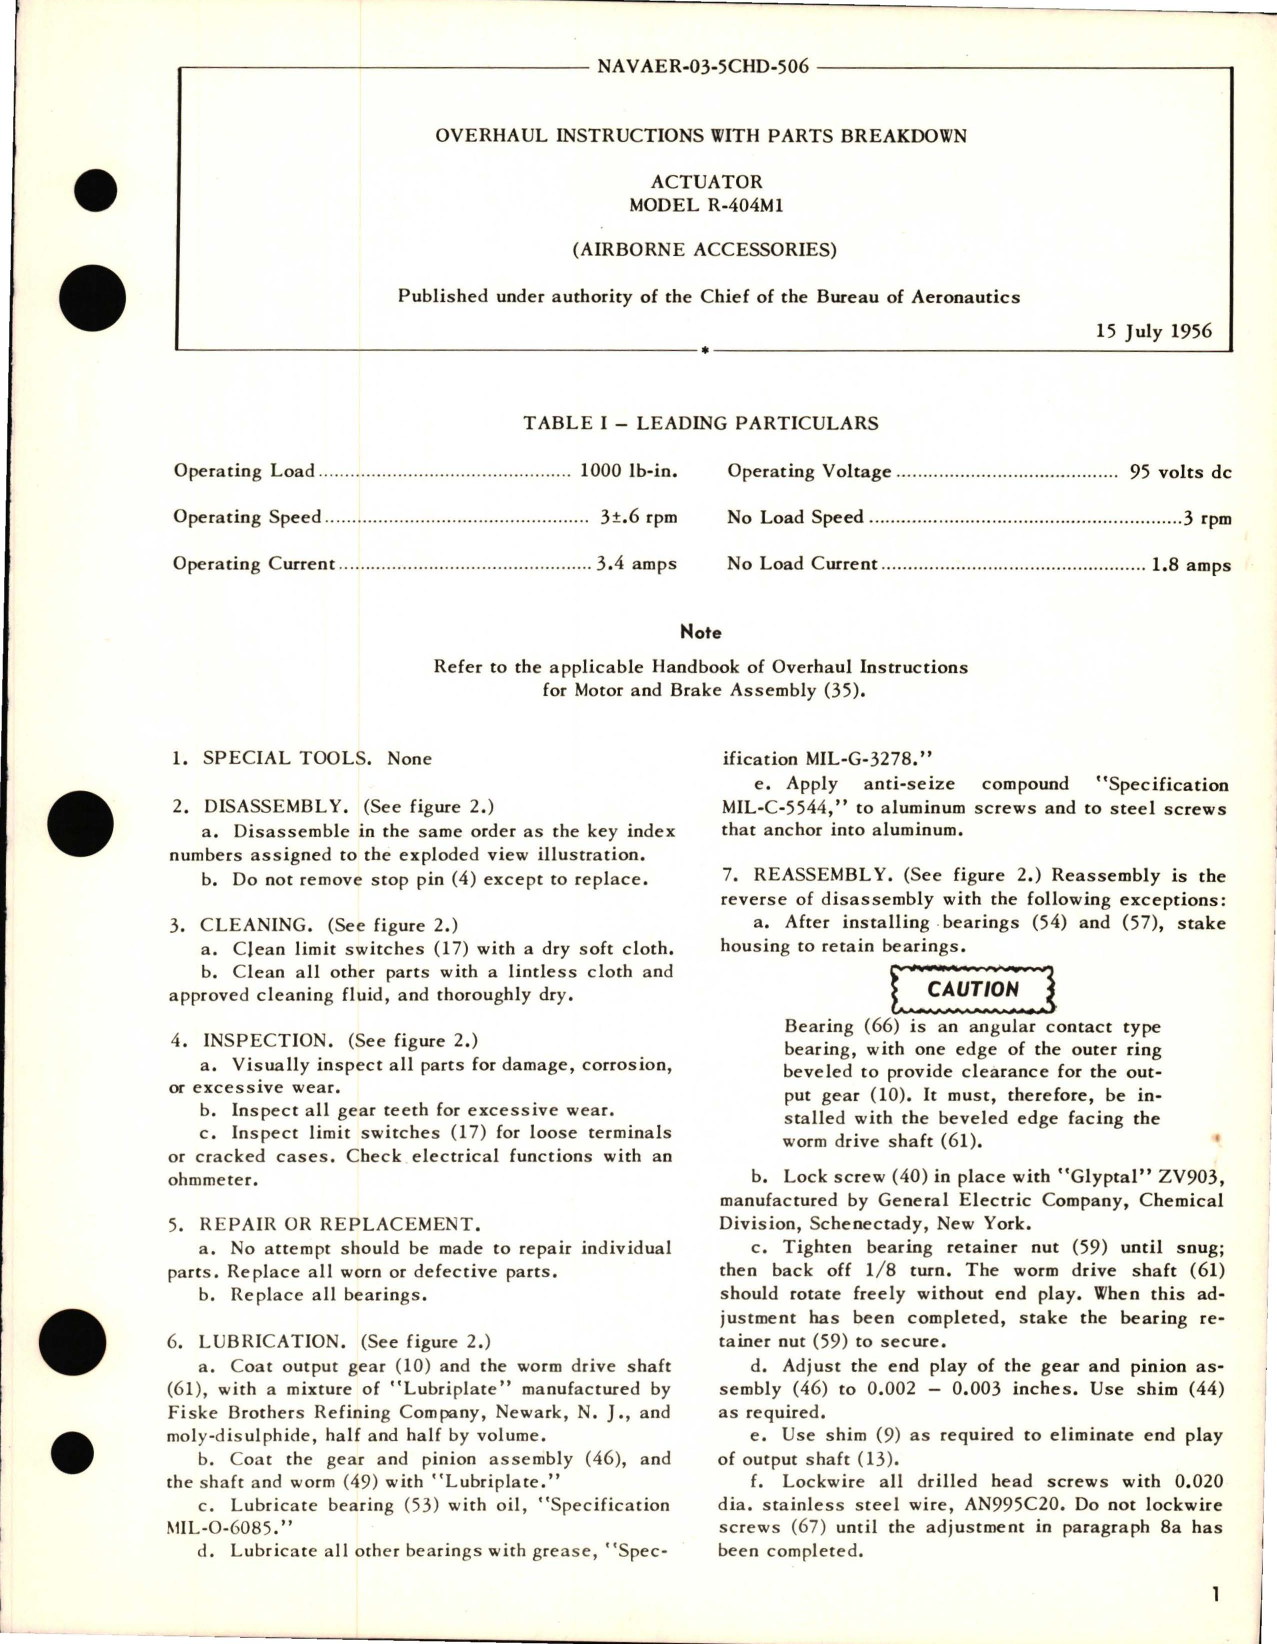 Sample page 1 from AirCorps Library document: Overhaul Instructions with Parts Breakdown for Actuator Model R-404M1